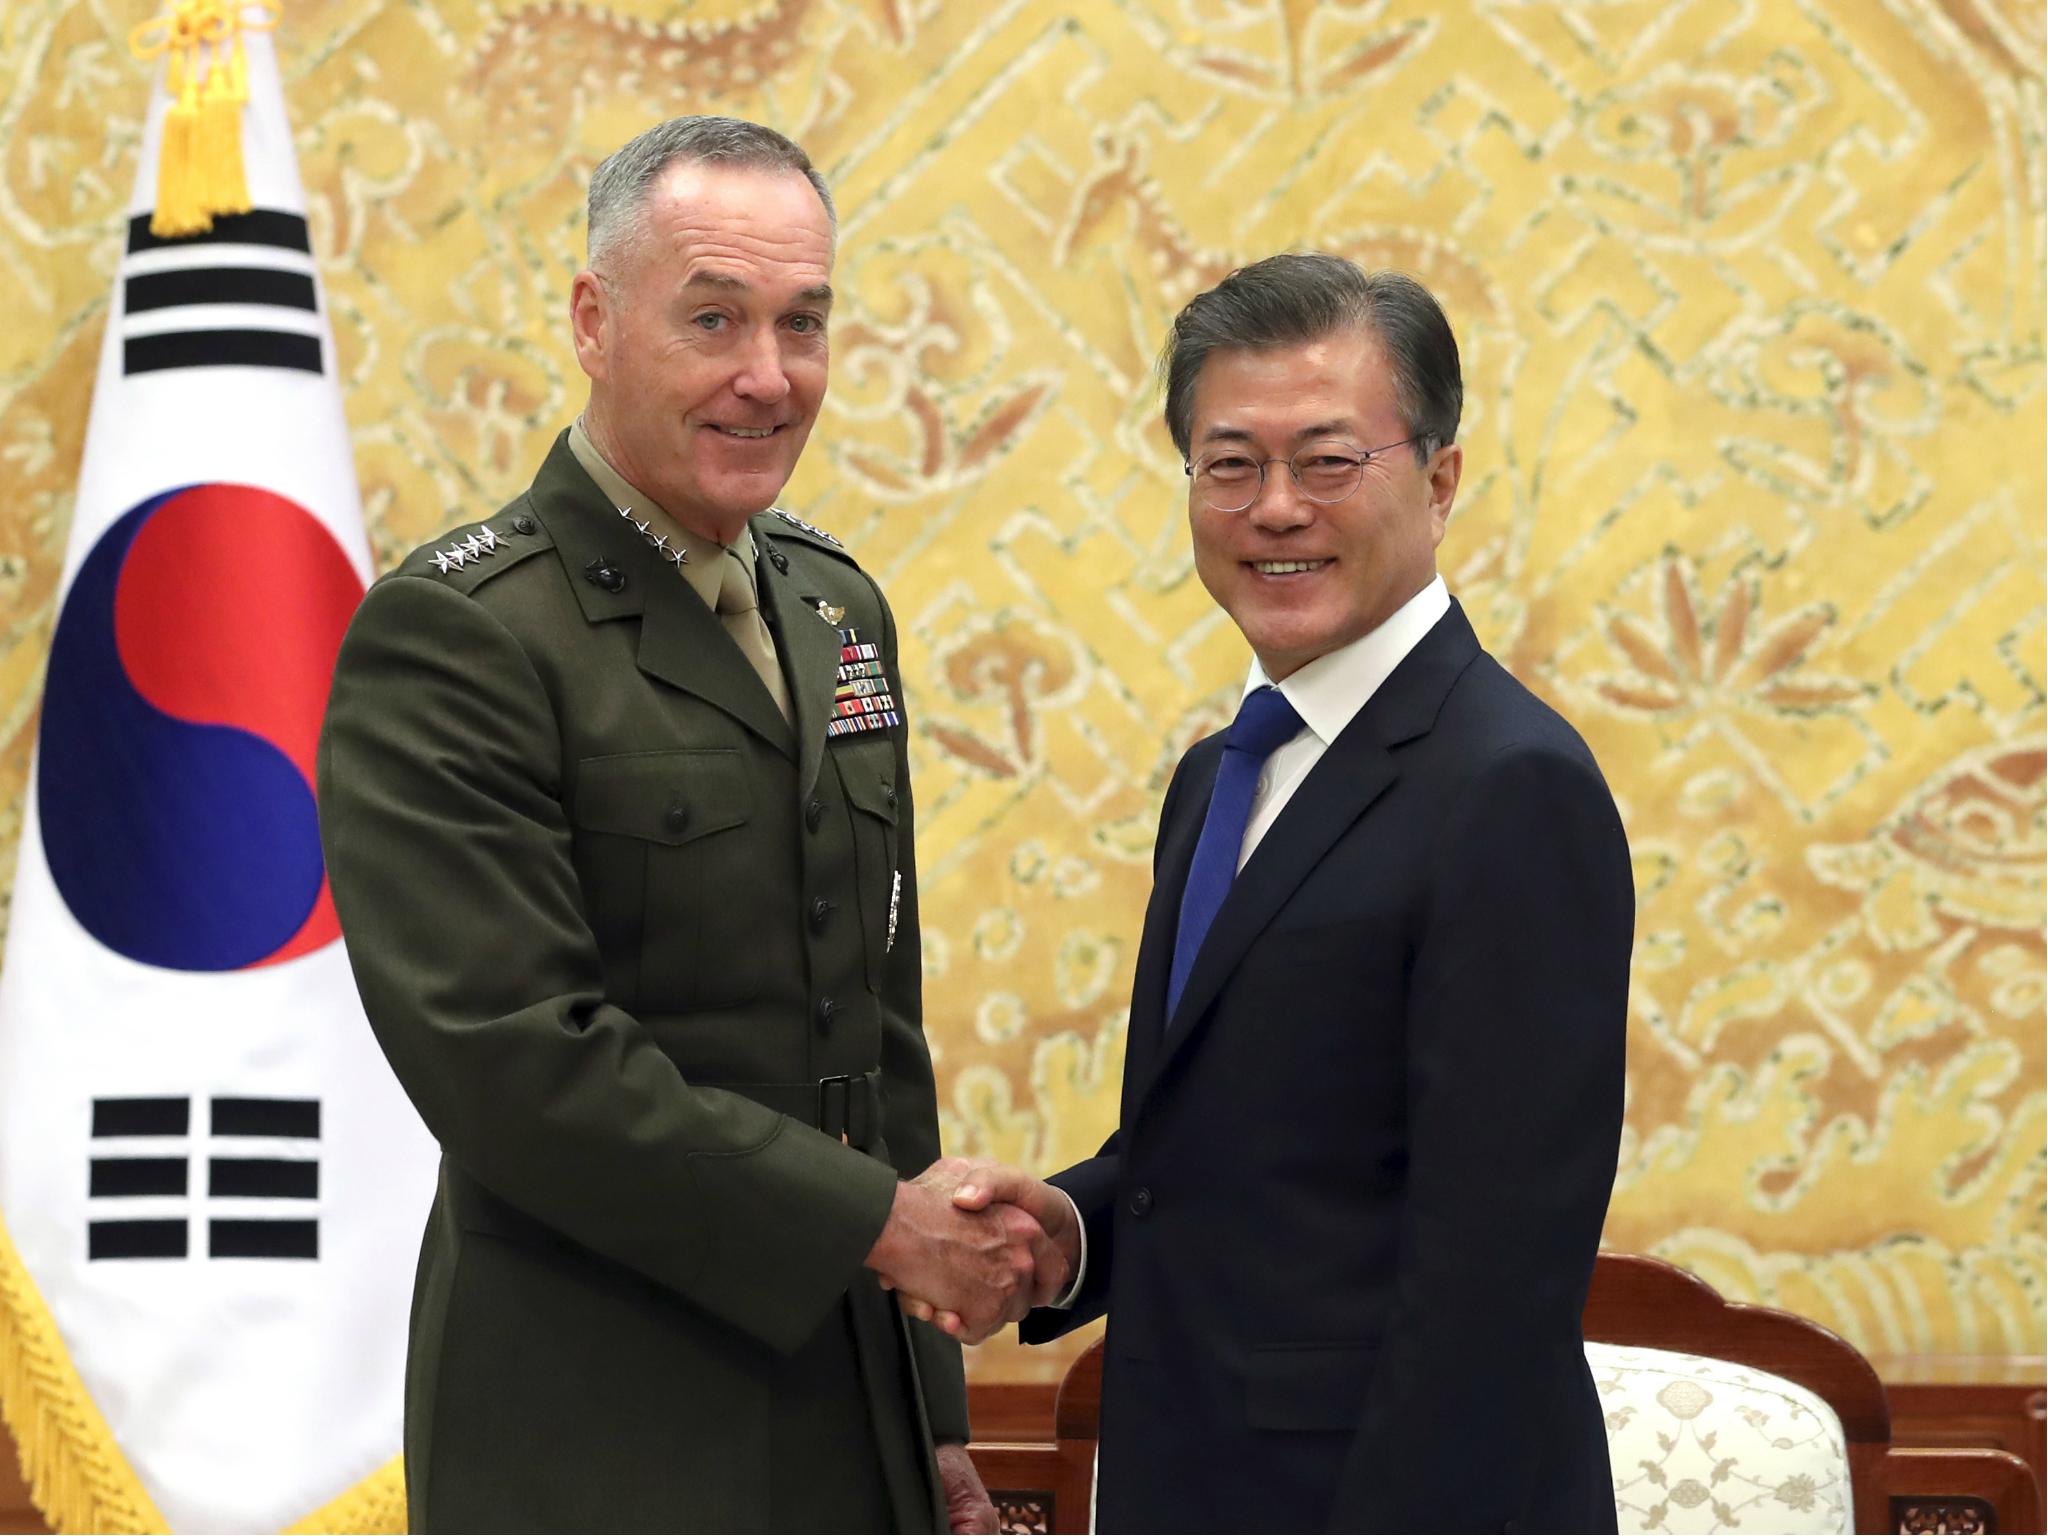 South Korean President Moon Jae-in poses with US Joint Chiefs Chairman General Joseph Dunford for a photo during a meeting at the presidential Blue House in Seoul, South Korea